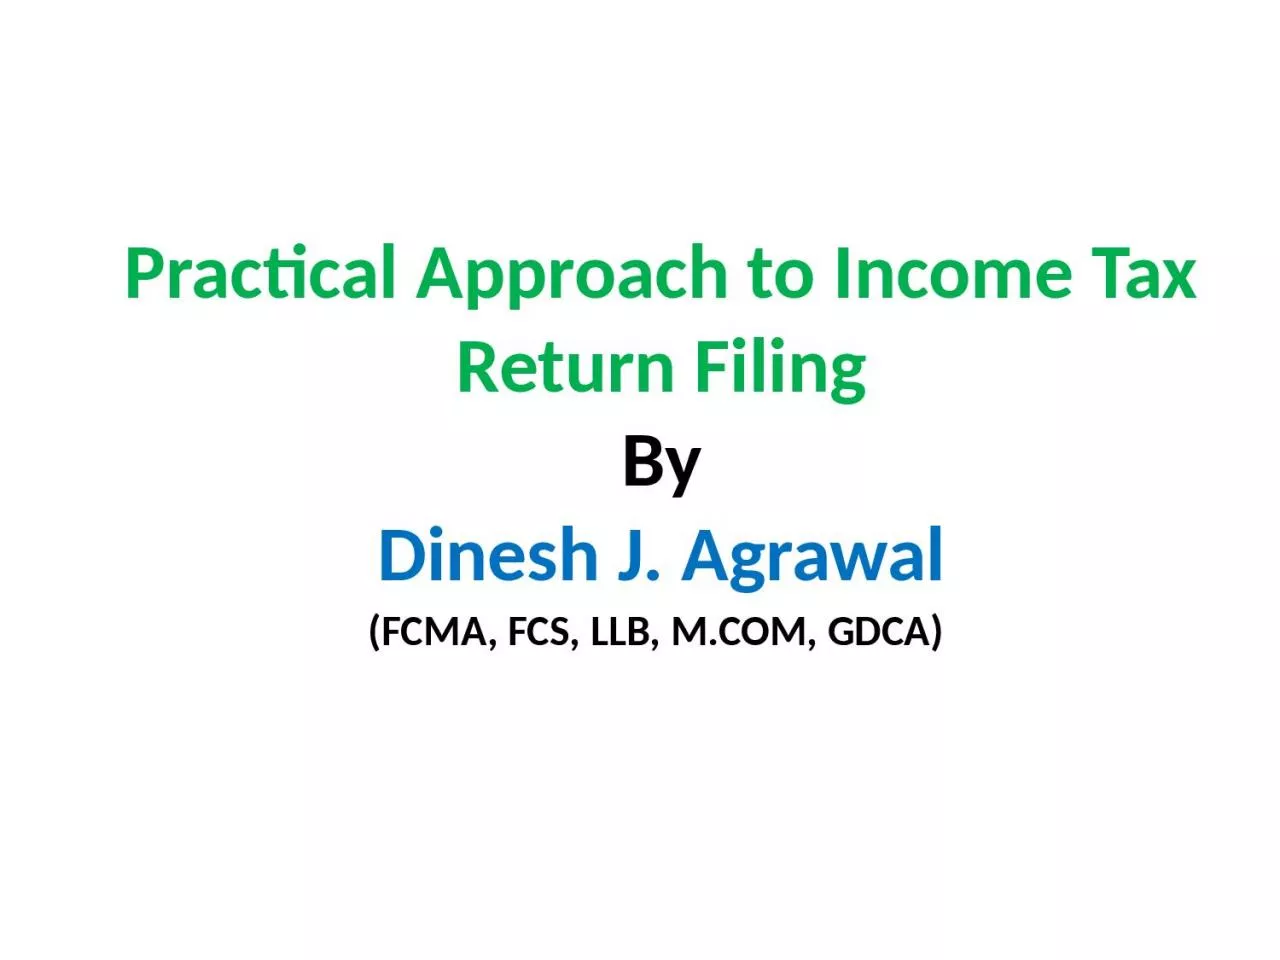 Practical Approach to Income Tax Return Filing